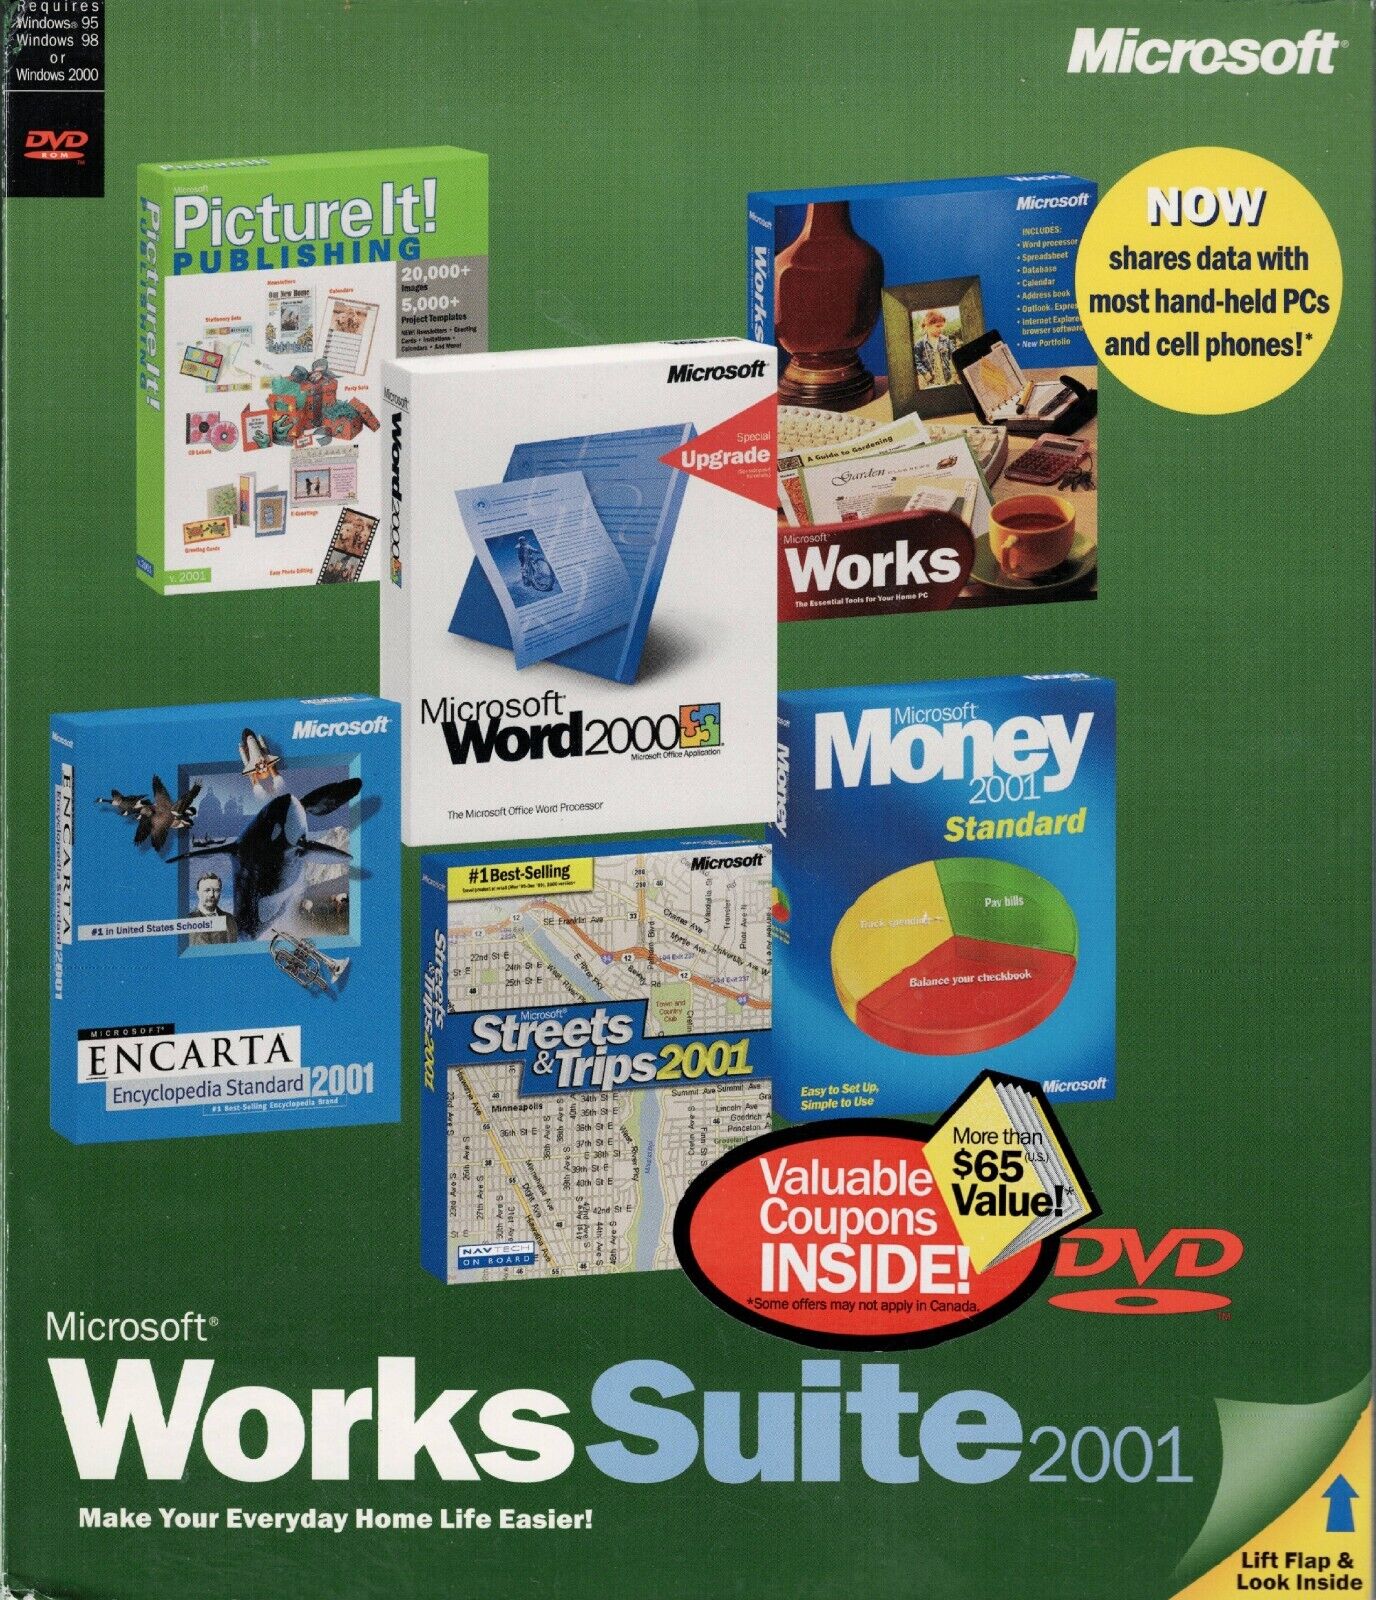 Microsoft Works Suite 2001 Retail 1 User/s Full Version for Windows New DVD XP